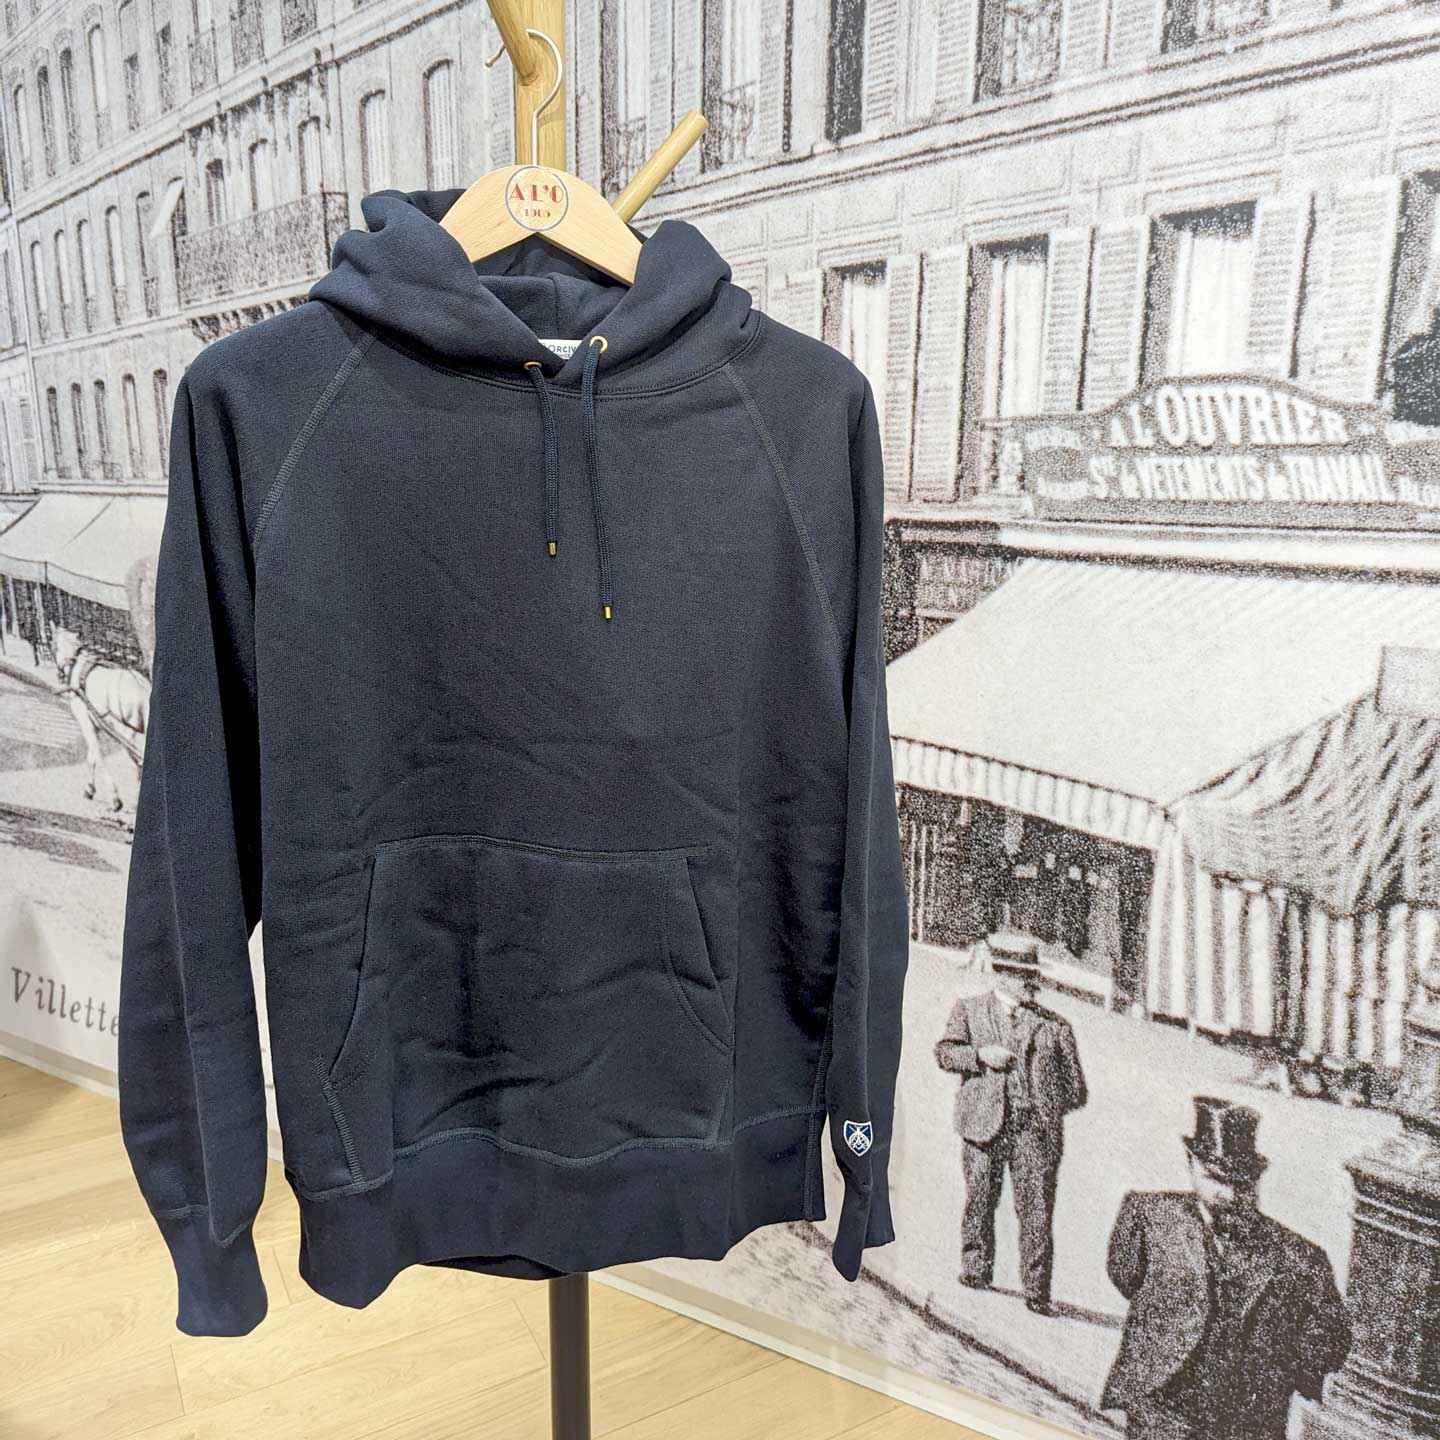 Classic Hoodie Navy 100% cotton, unisex ORCIVAL #OR-C0155